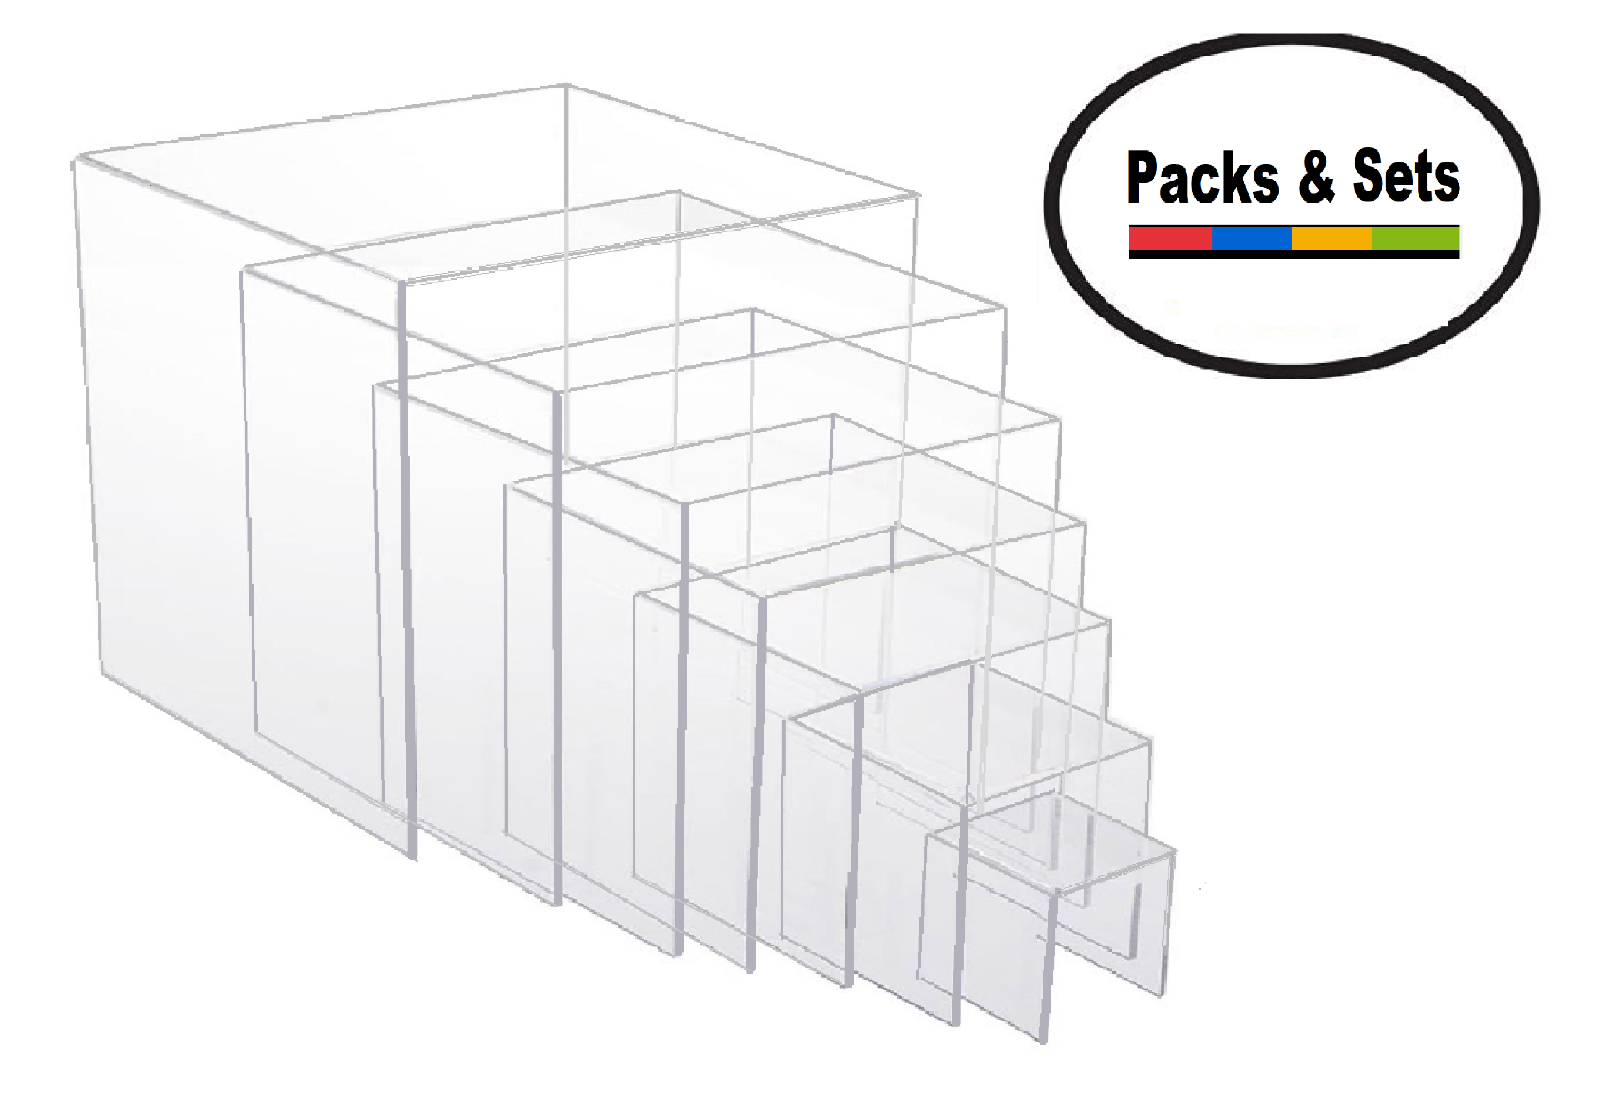 Clear Acrylic Square Platform Risers Variety Sets & Packs 2" To 8" Inch Sizes